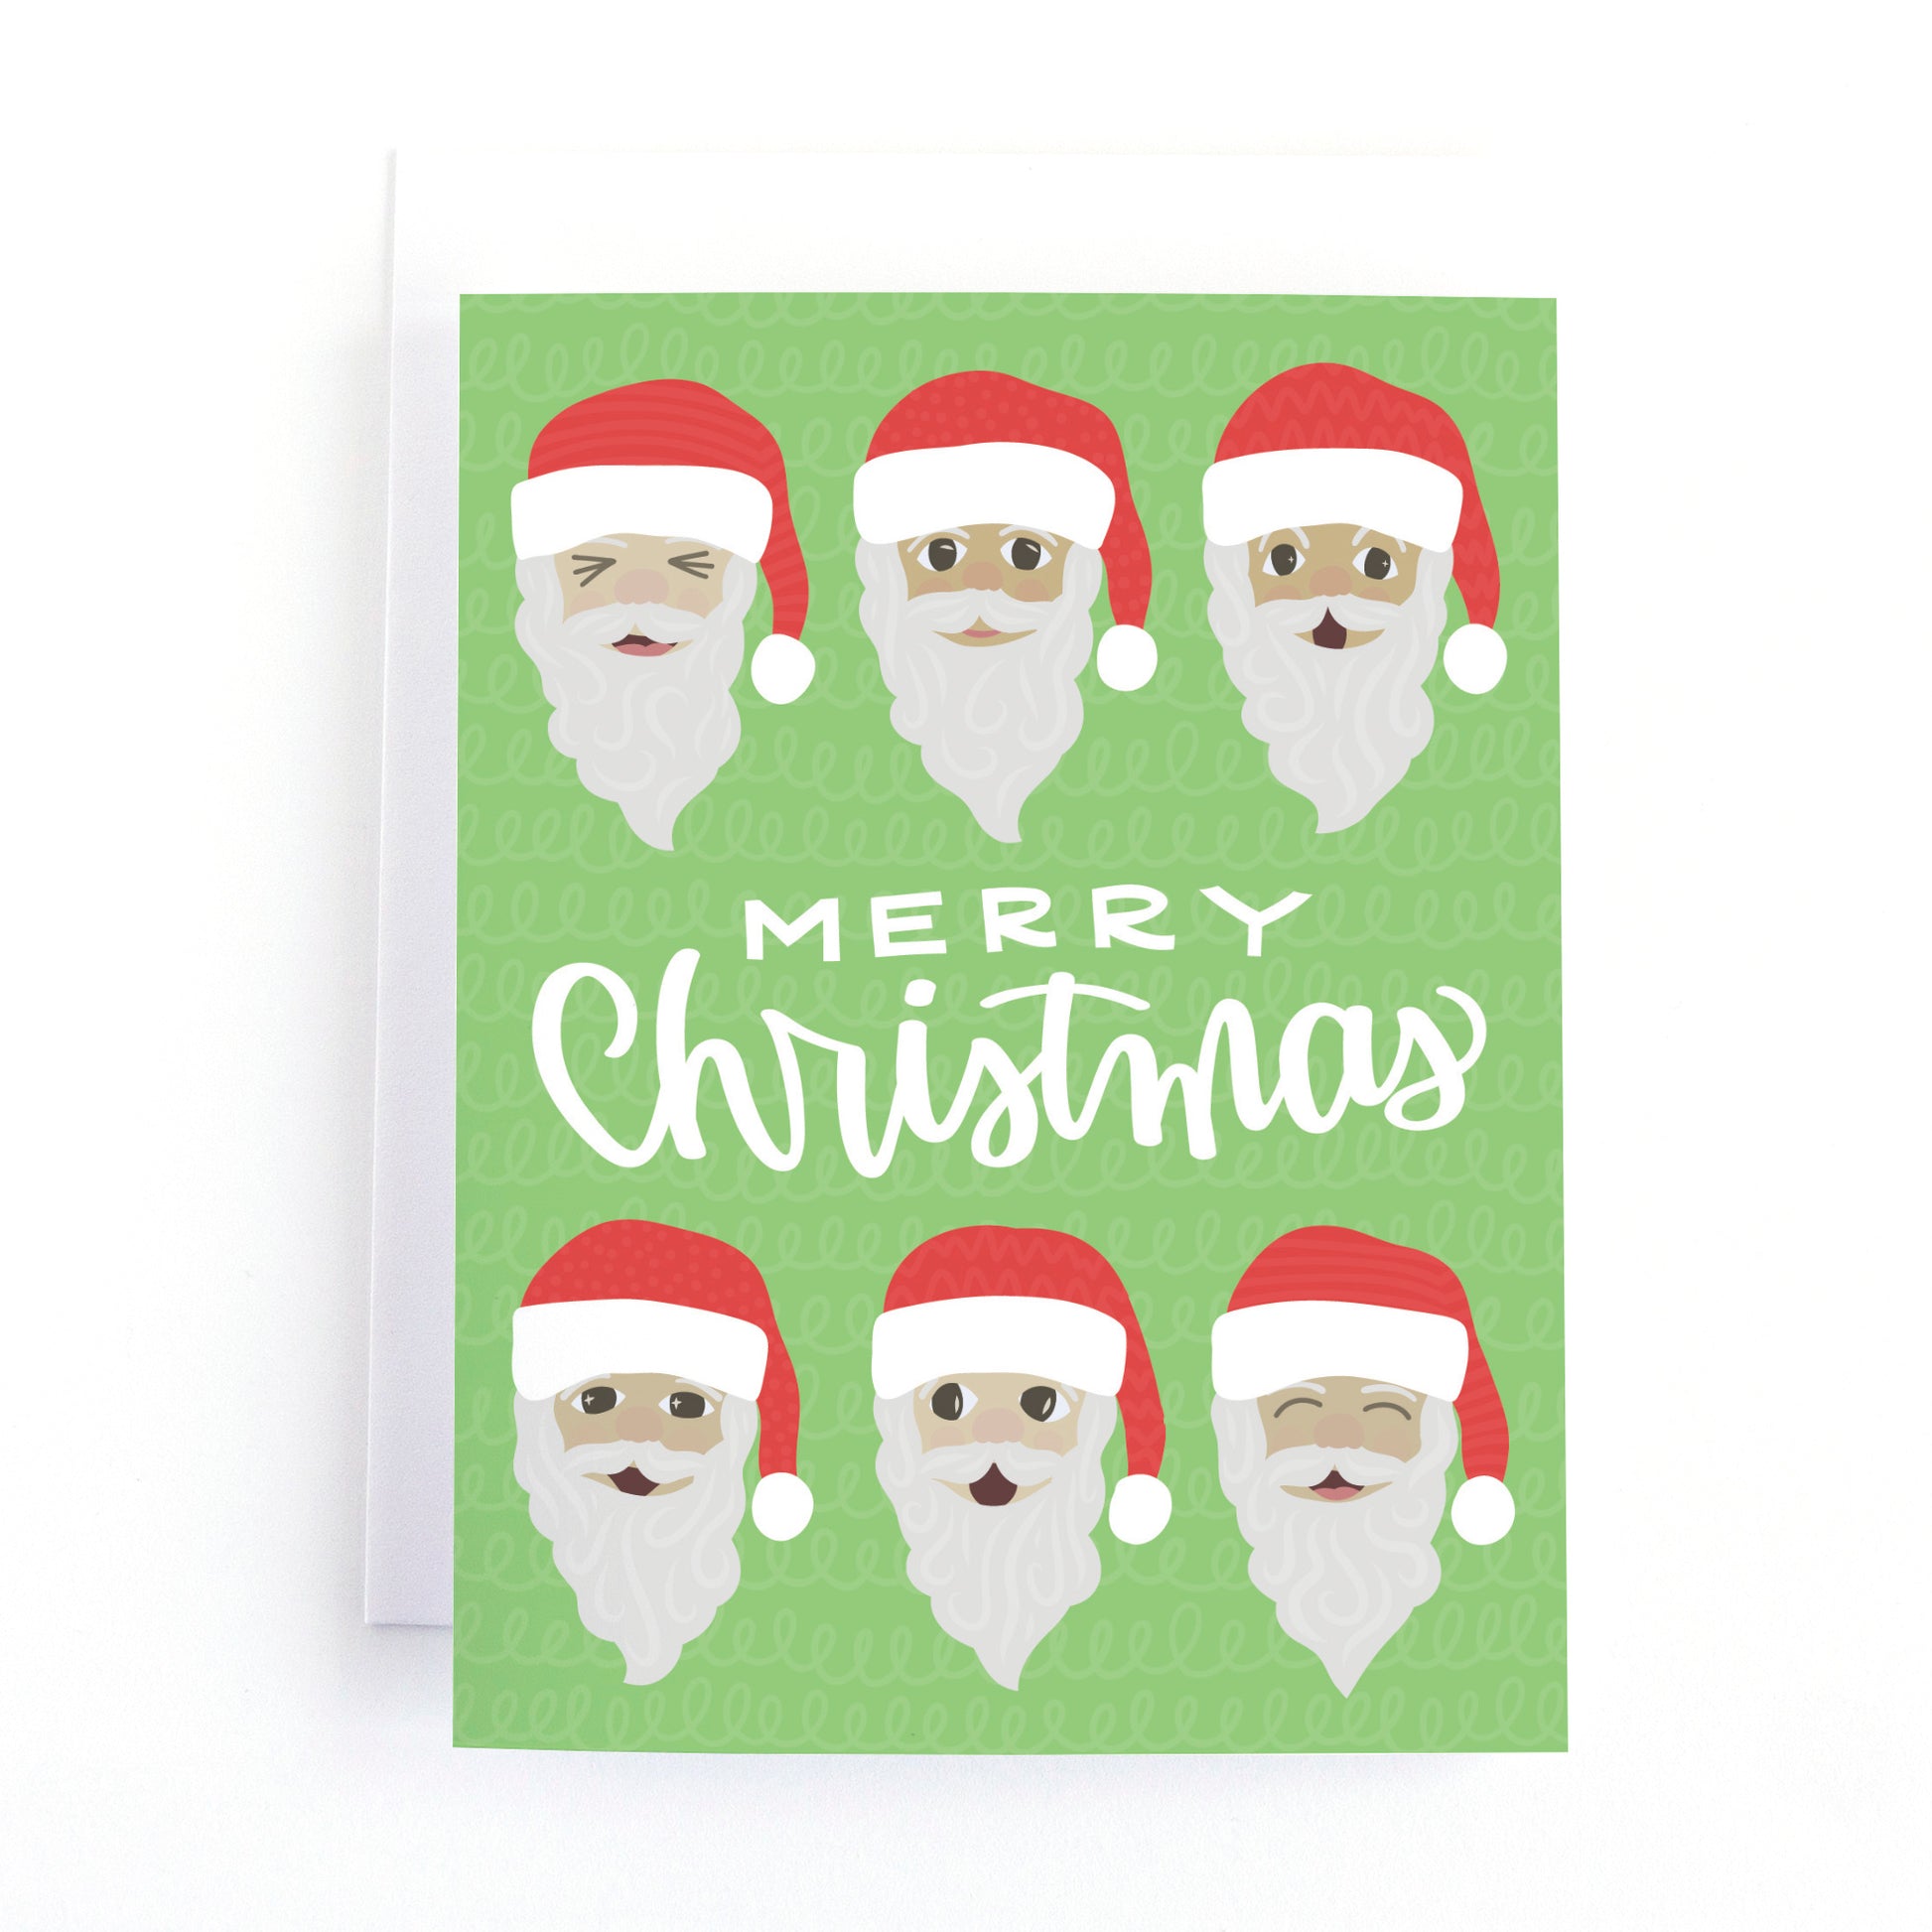 Illustrated Christmas card featuring cute Santa faces on a bright green background with the message Merry Christmas